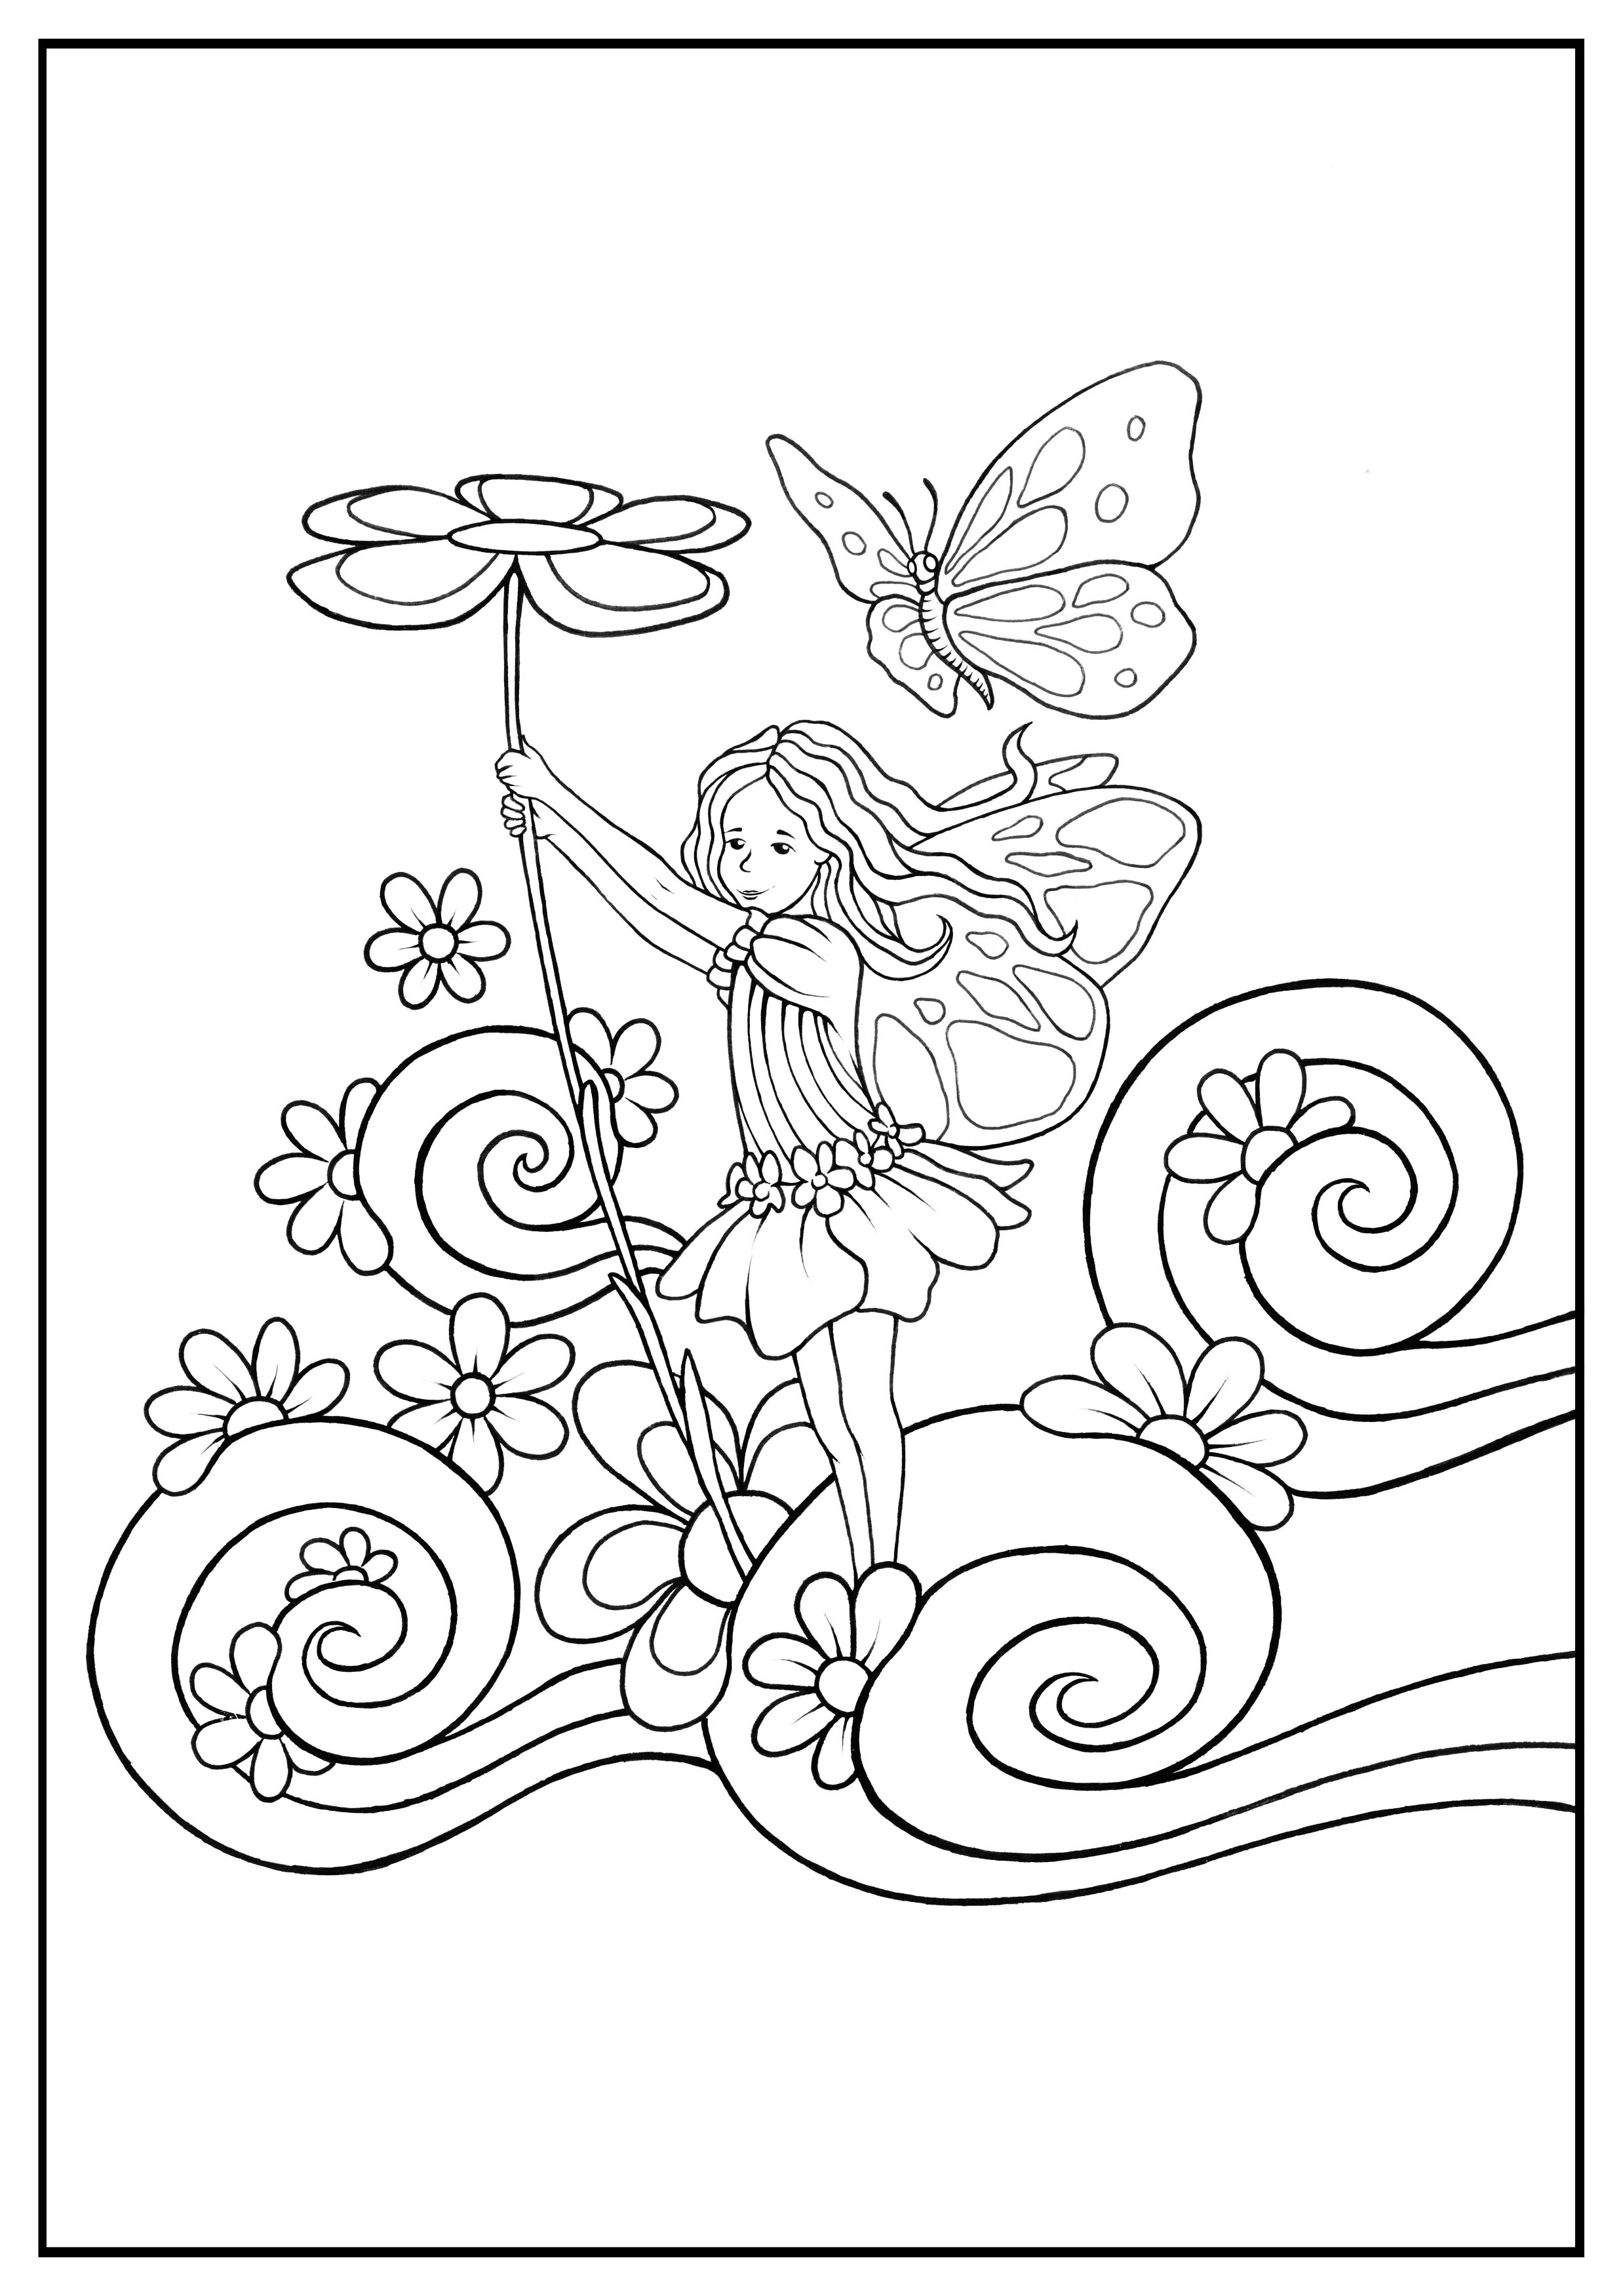 760 Cute Forest Fairy Coloring Pages for Adult